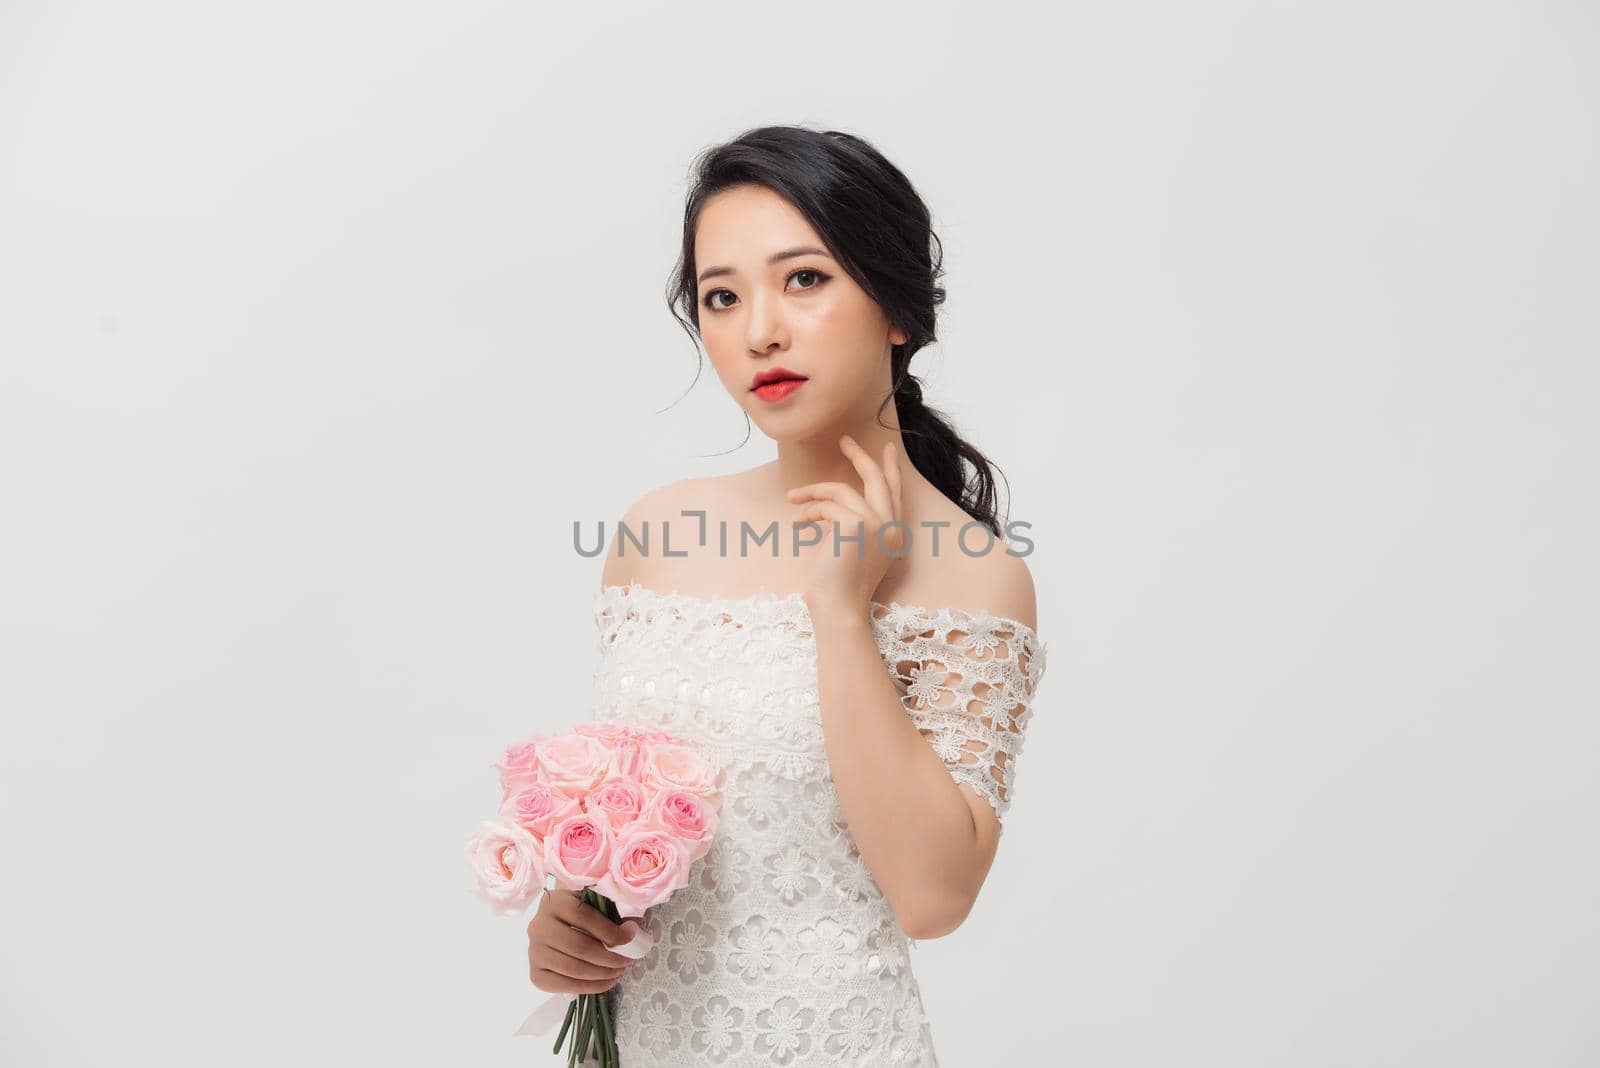 Fashion portrait of elegant woman with rose flower bouquet over white background.